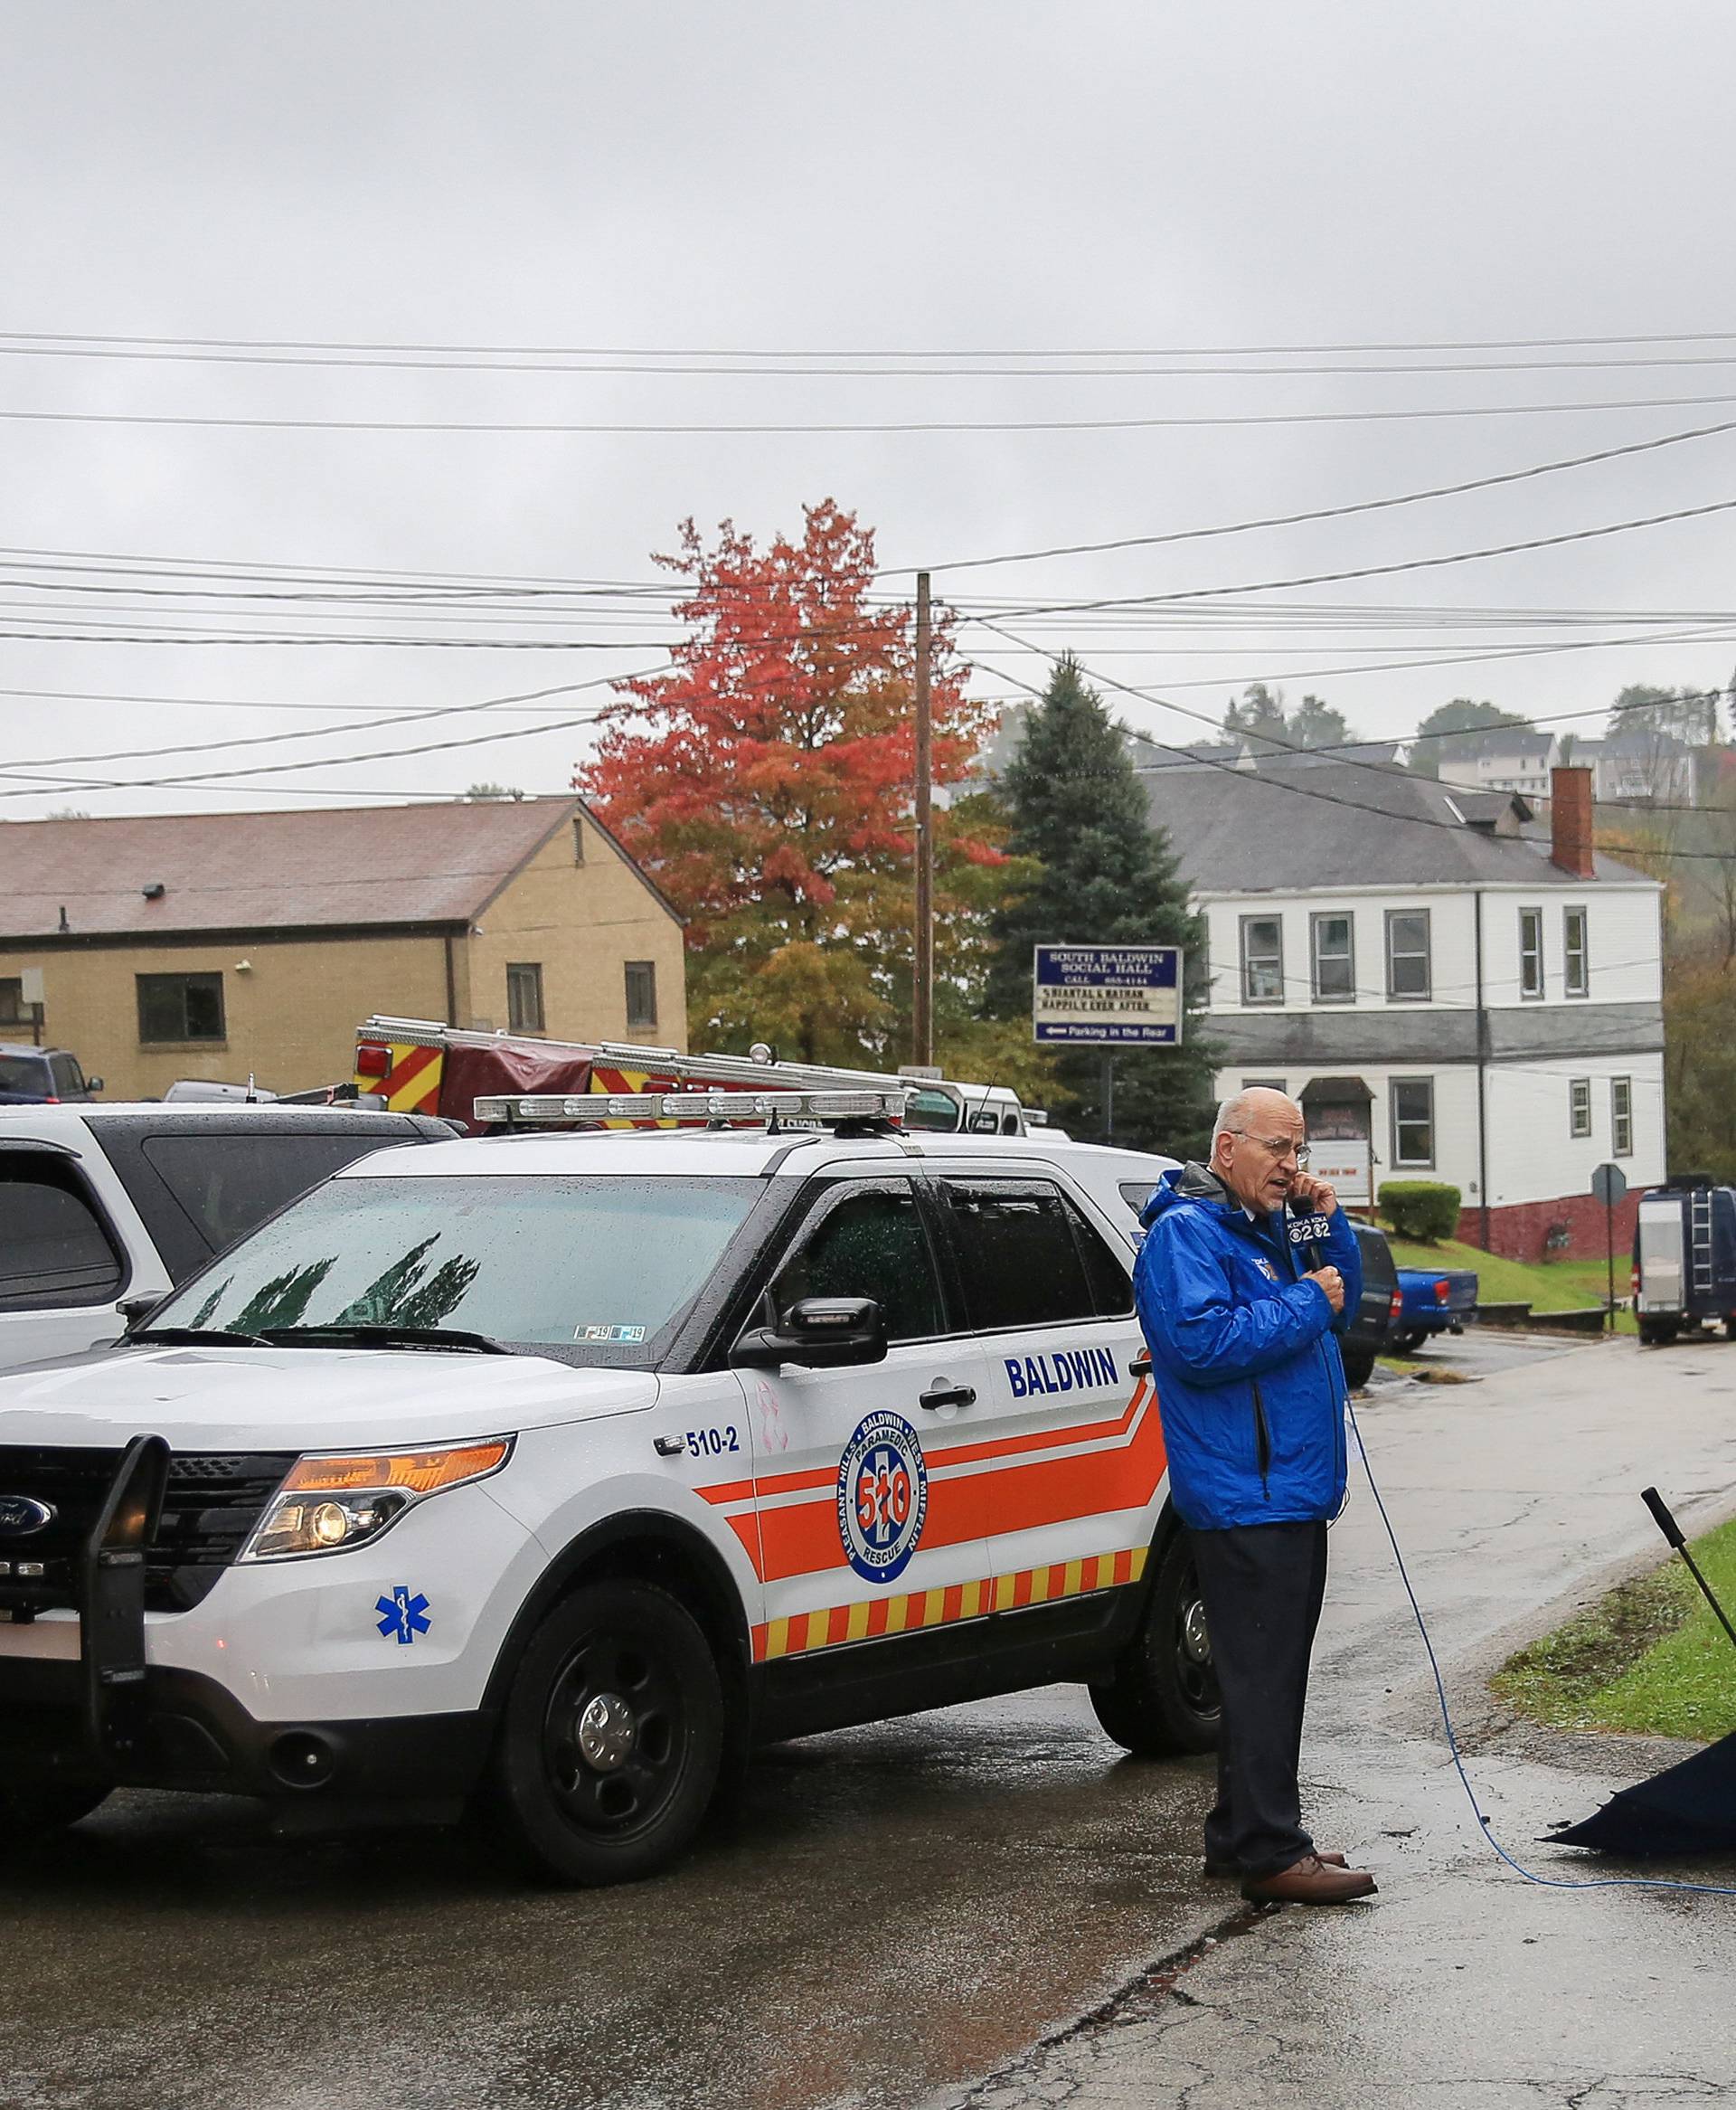 Police vehicles block off the road near the home of Pittsburgh synagogue shooting suspect Robert Bowers' home in Baldwin borough suburb of Pittsburgh